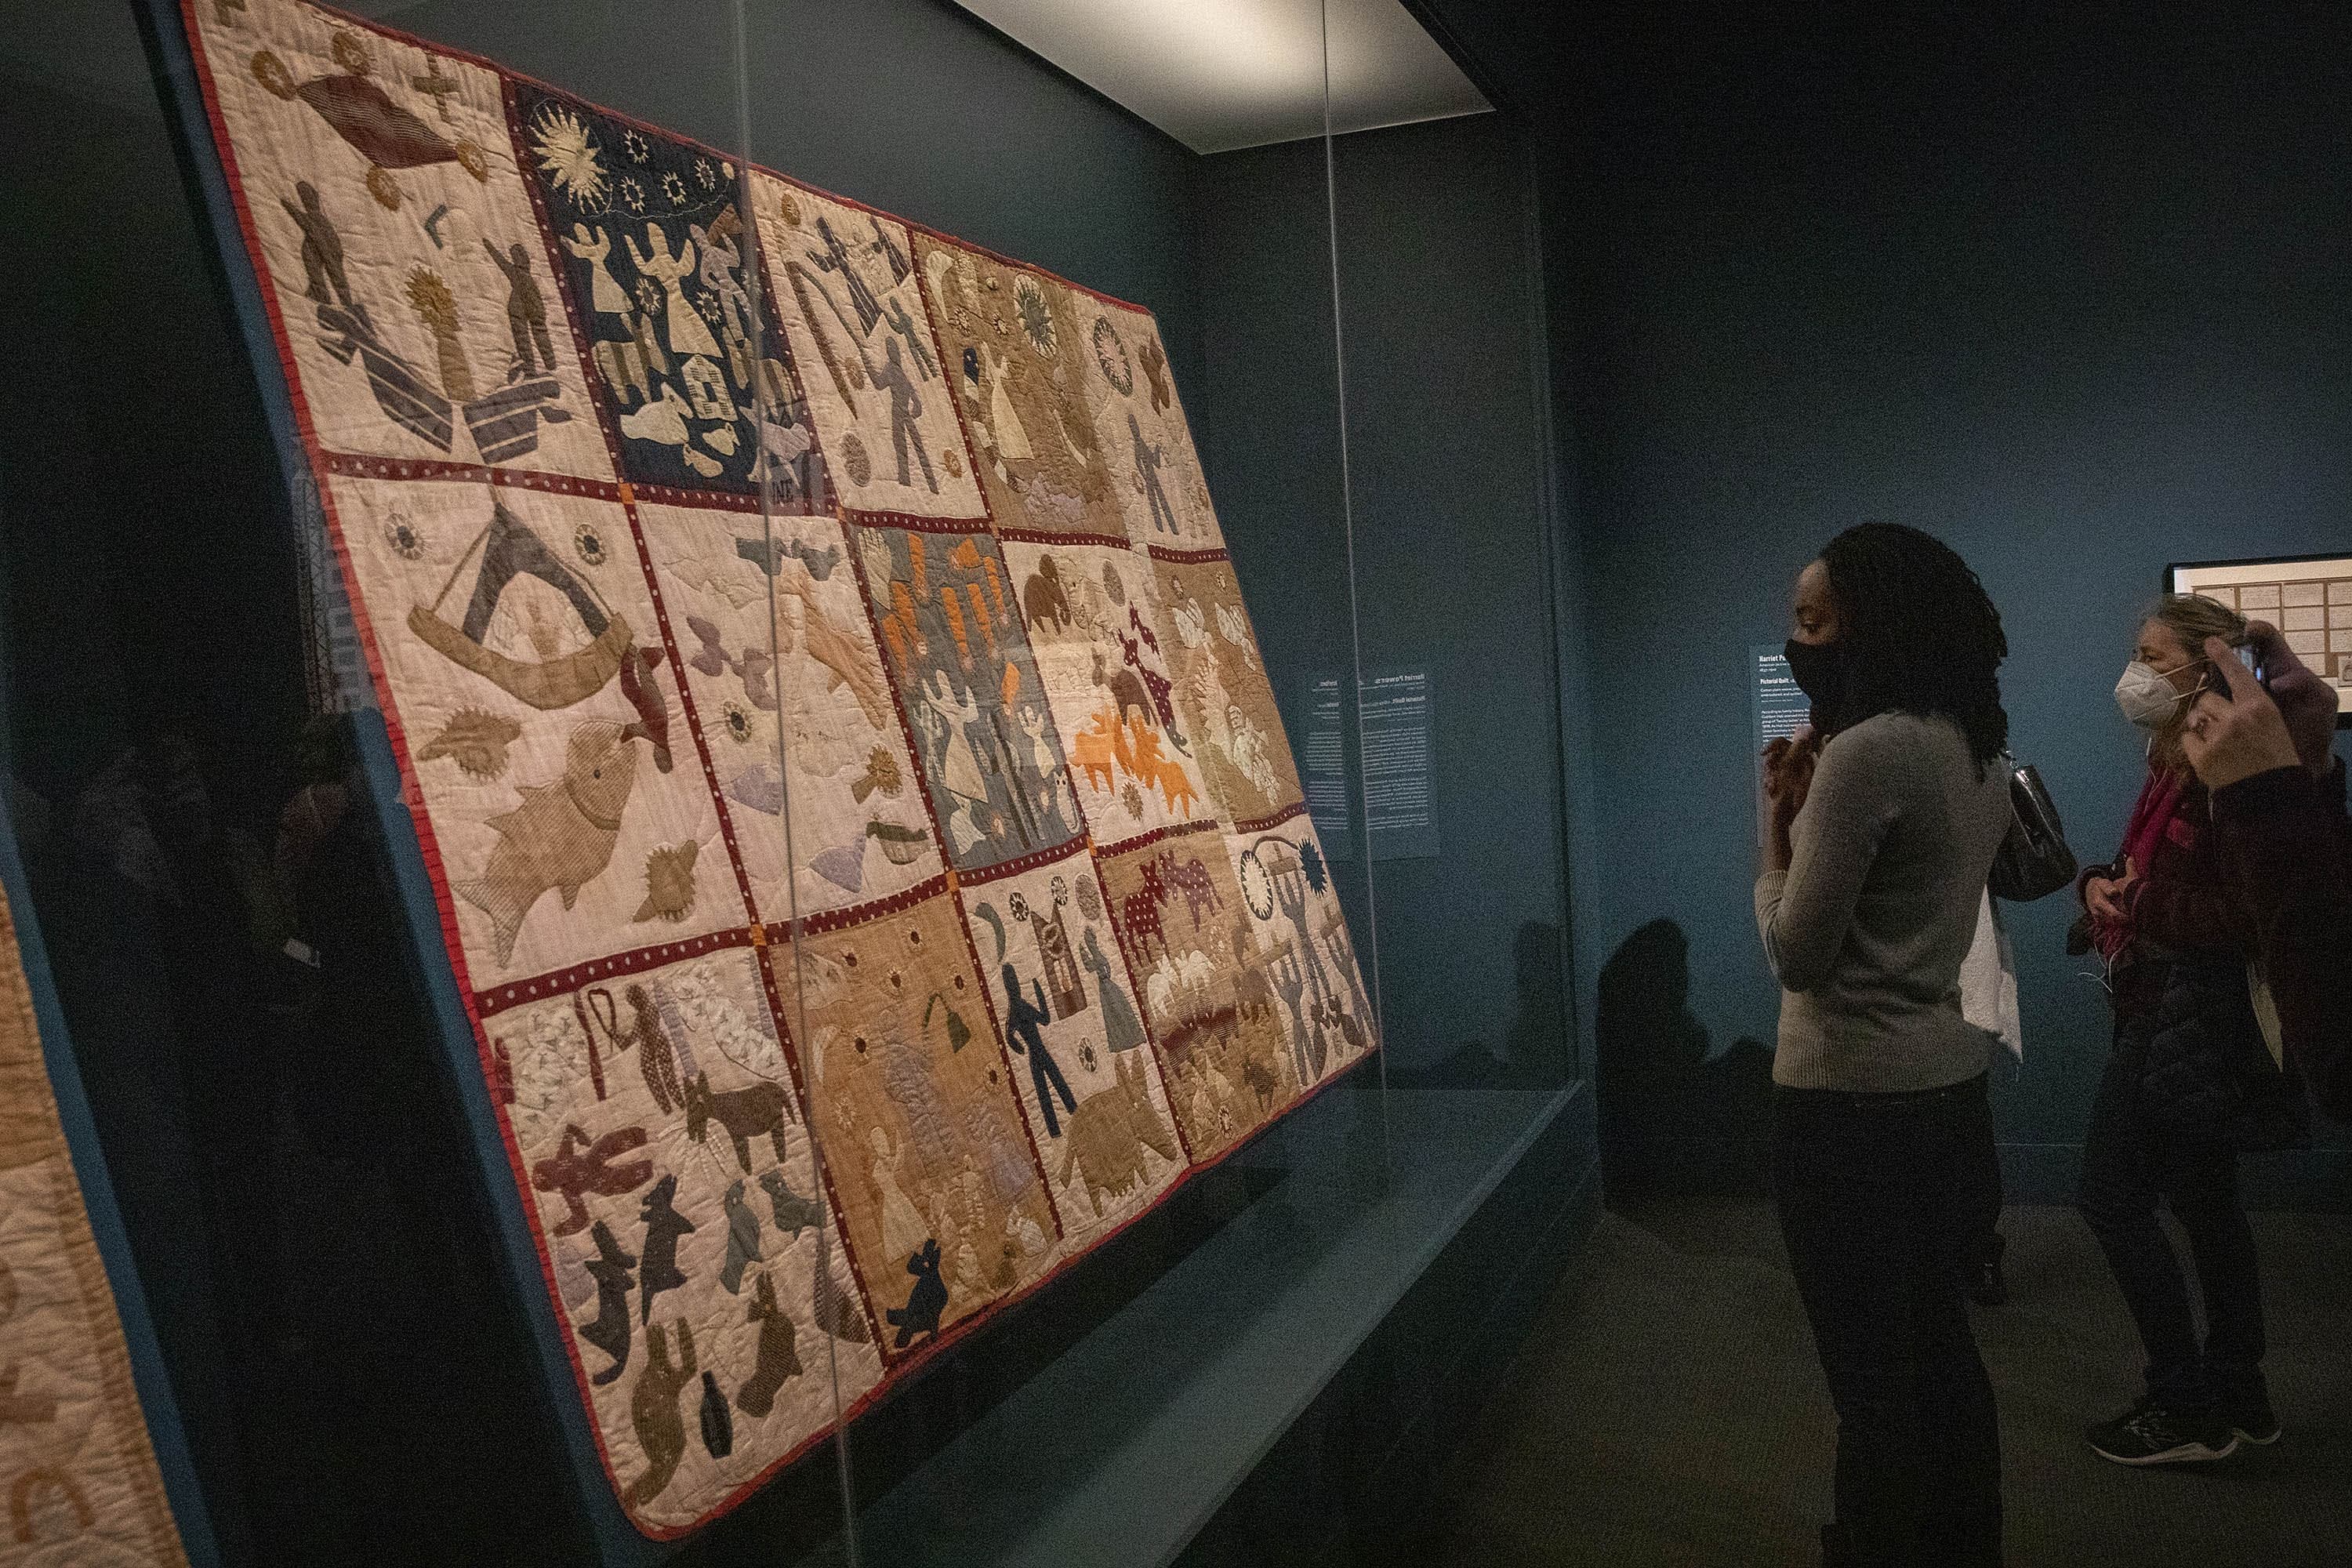 Alyse Minter, a descendent of Harriet Powers, contemplates Powers' Pictorial Quilt on display in the MFA's exhibit &quot;Fabric of a Nation: American Quilt Stories.&quot; (Robin Lubbock/WBUR)